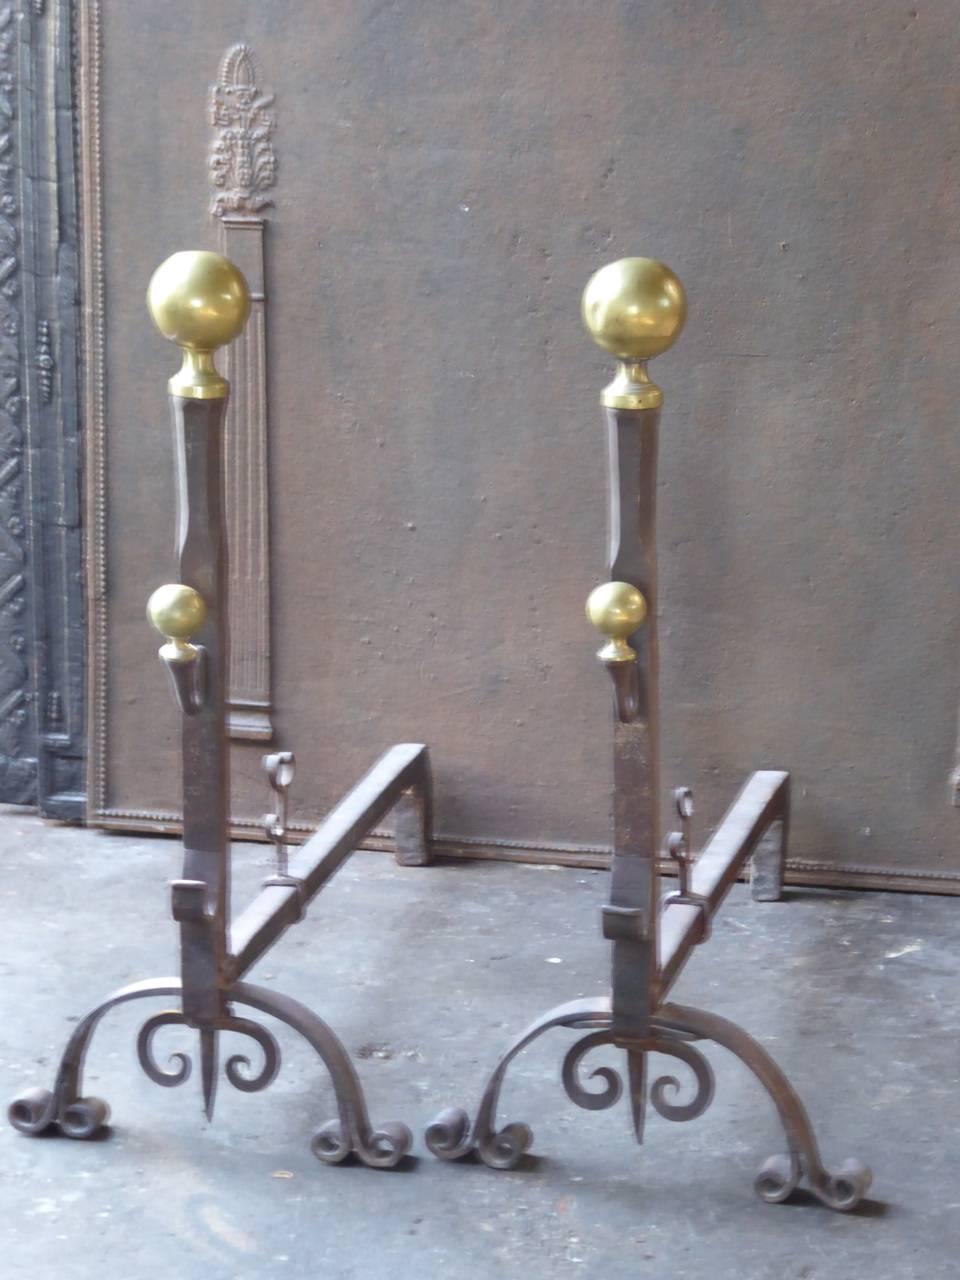 19th century French firedogs made of wrought iron and brass.

This product has to be shipped as freight due to its size and/or (volumetric) weight. You can contact us to find out the daily rate for a freight shipment of this product to your